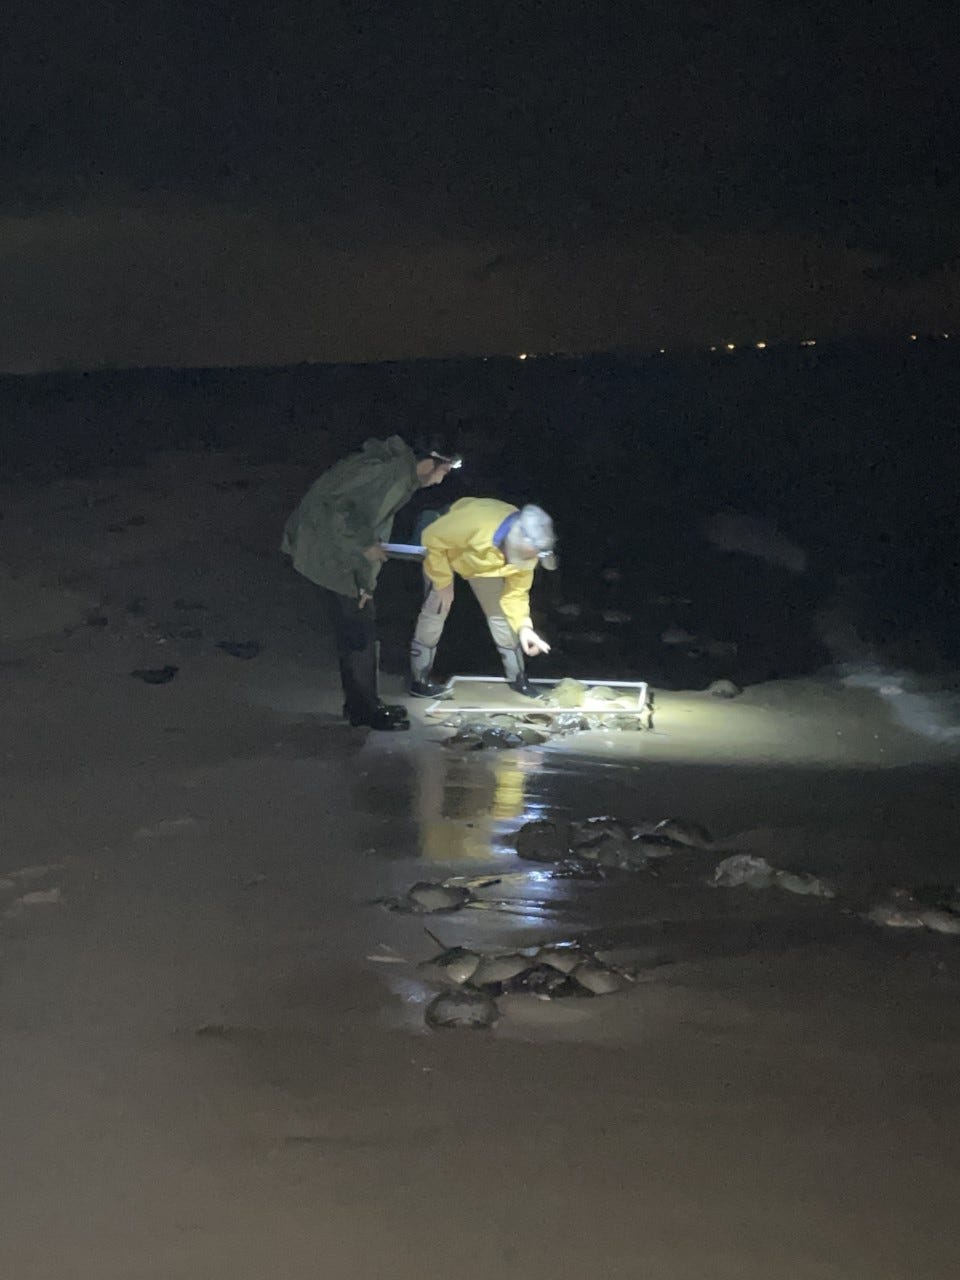 two people work on the beach at night with headlamps